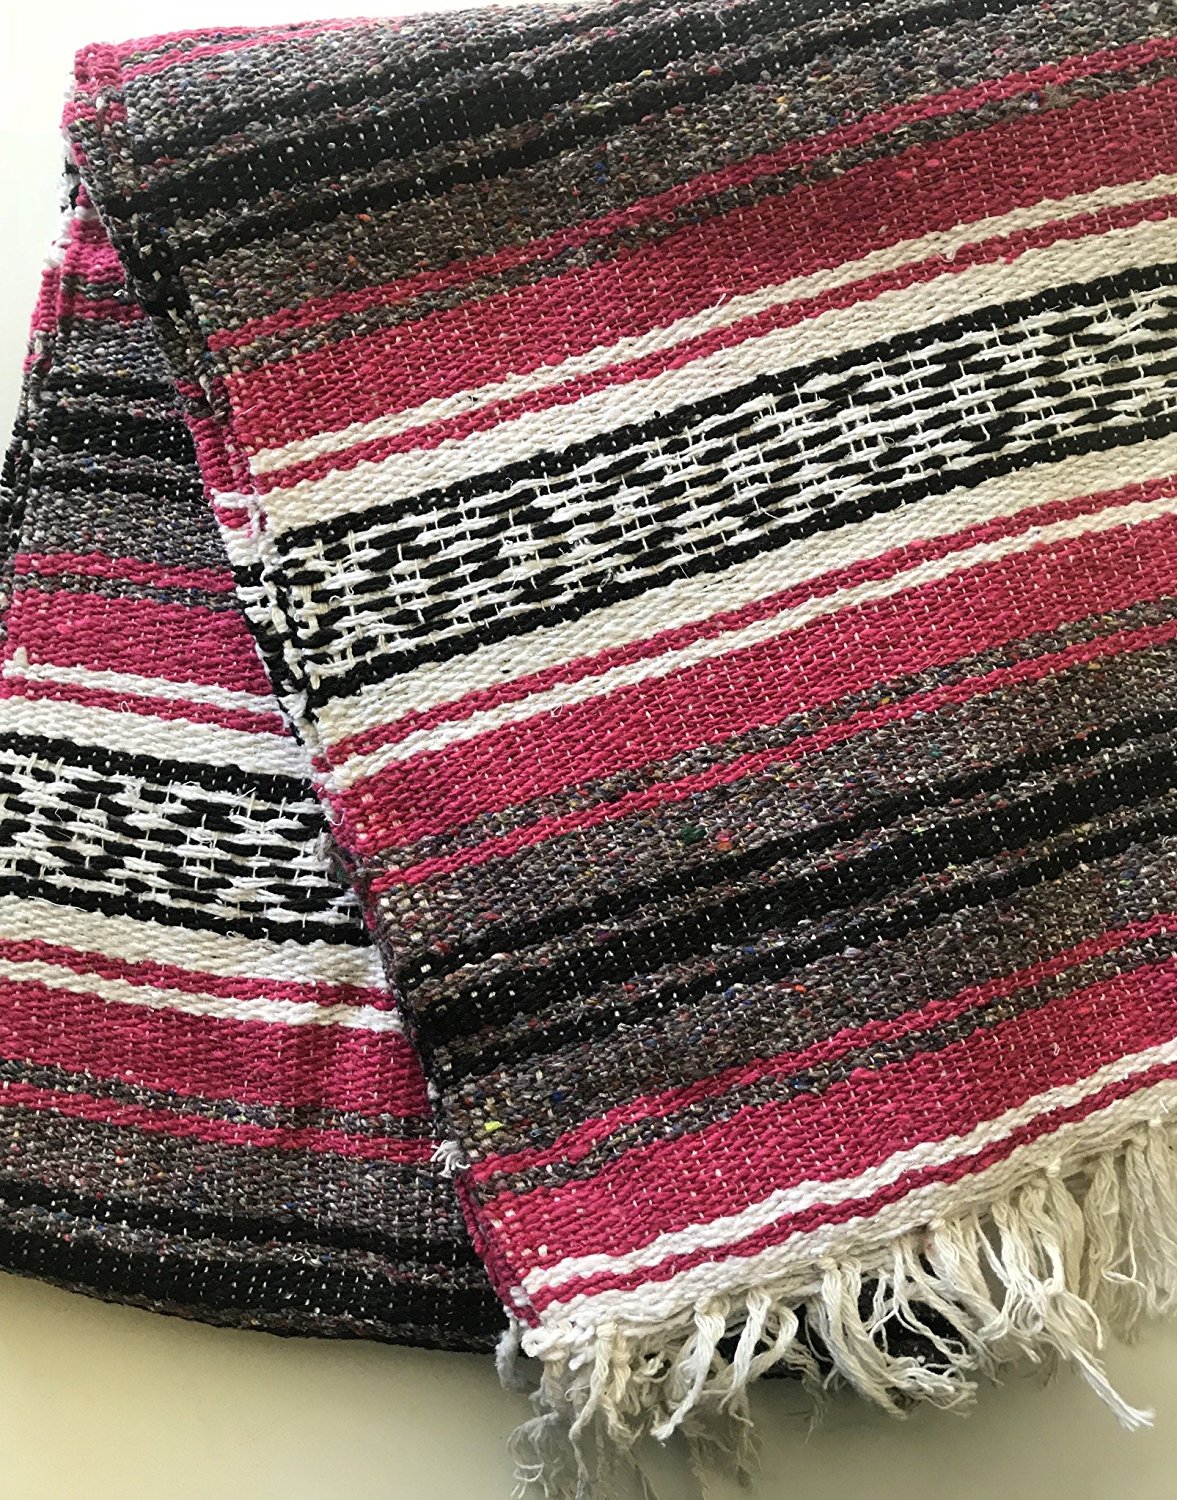 Mexitems Mexican Falsa Blanket Authentic 52 X 72 Pick Your Own Color Brown/Tan/Black 